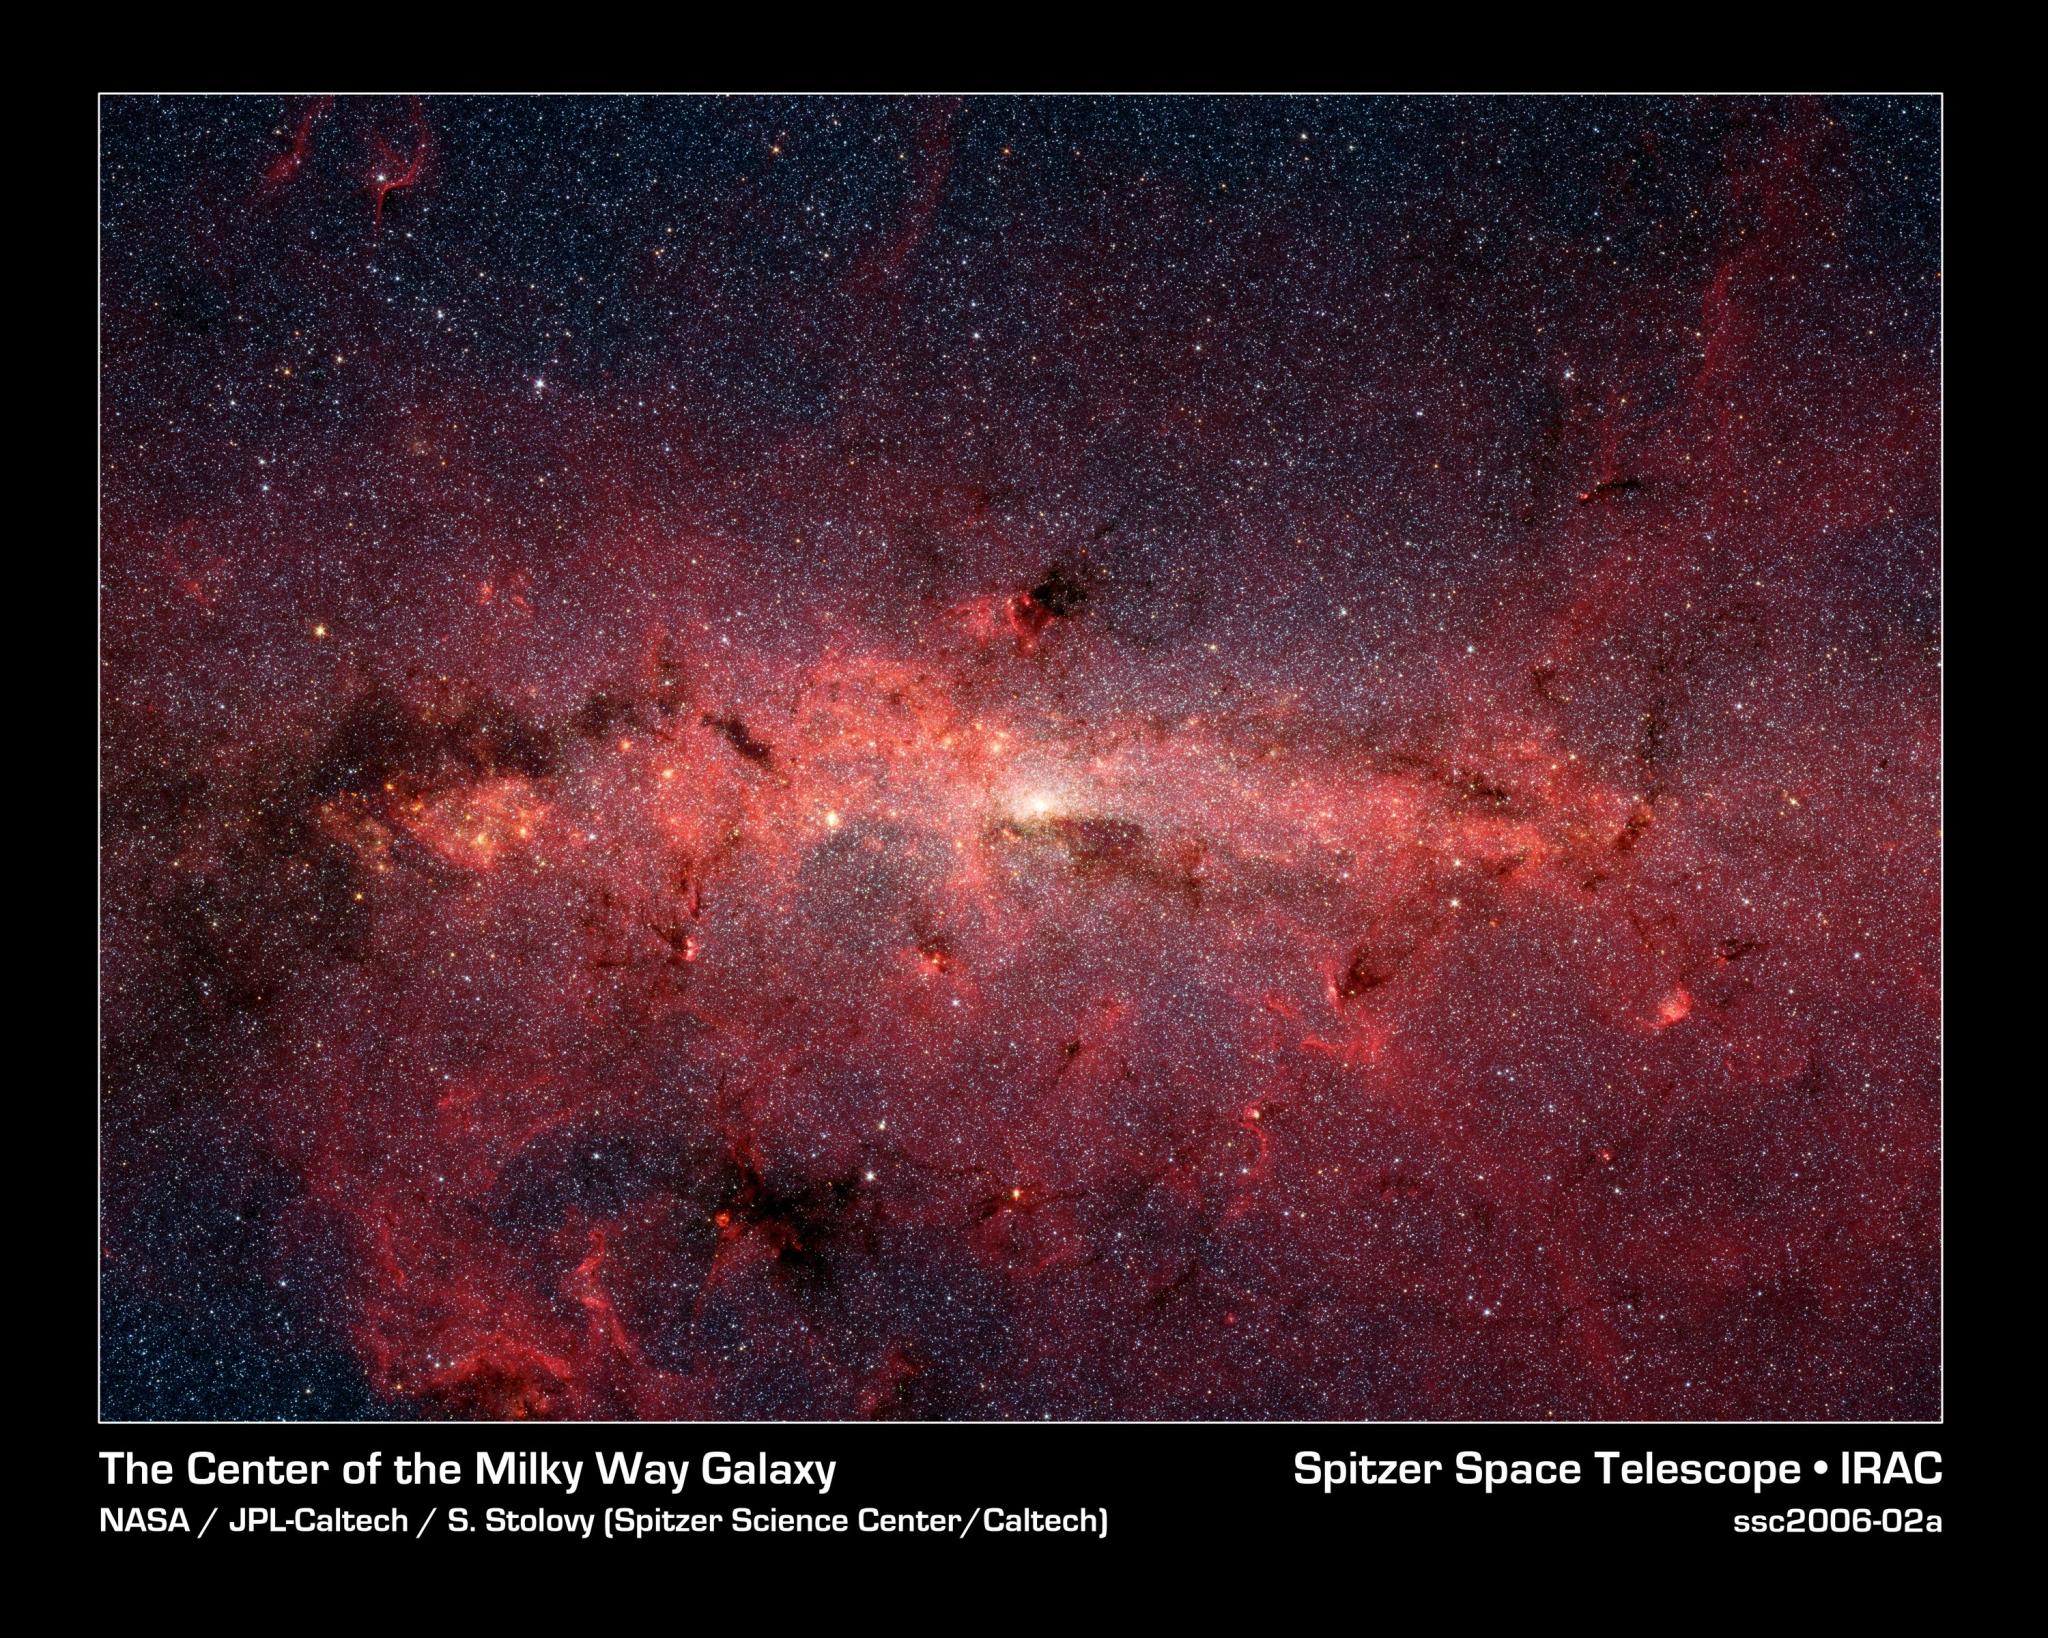 Spitzer Space Telescope reveal stars in the crowded galatic center region.